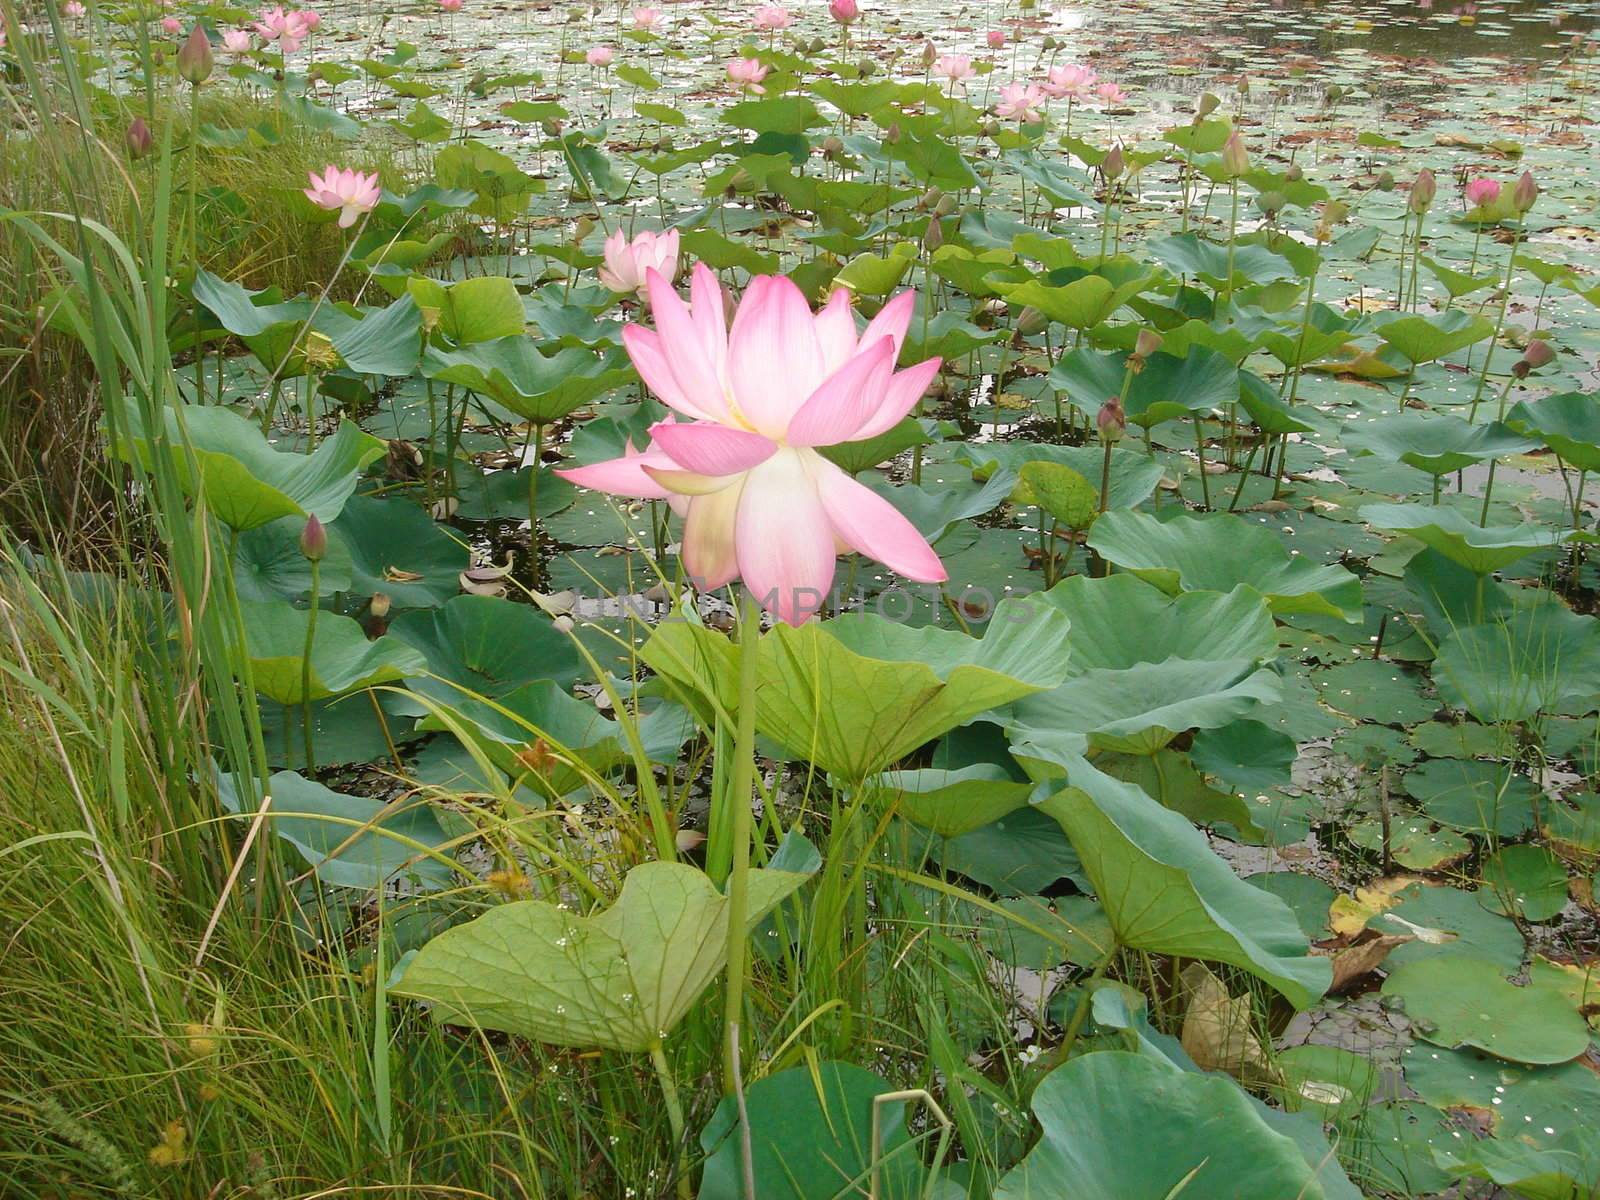 Lotus - is found in red book, flowers once per annum